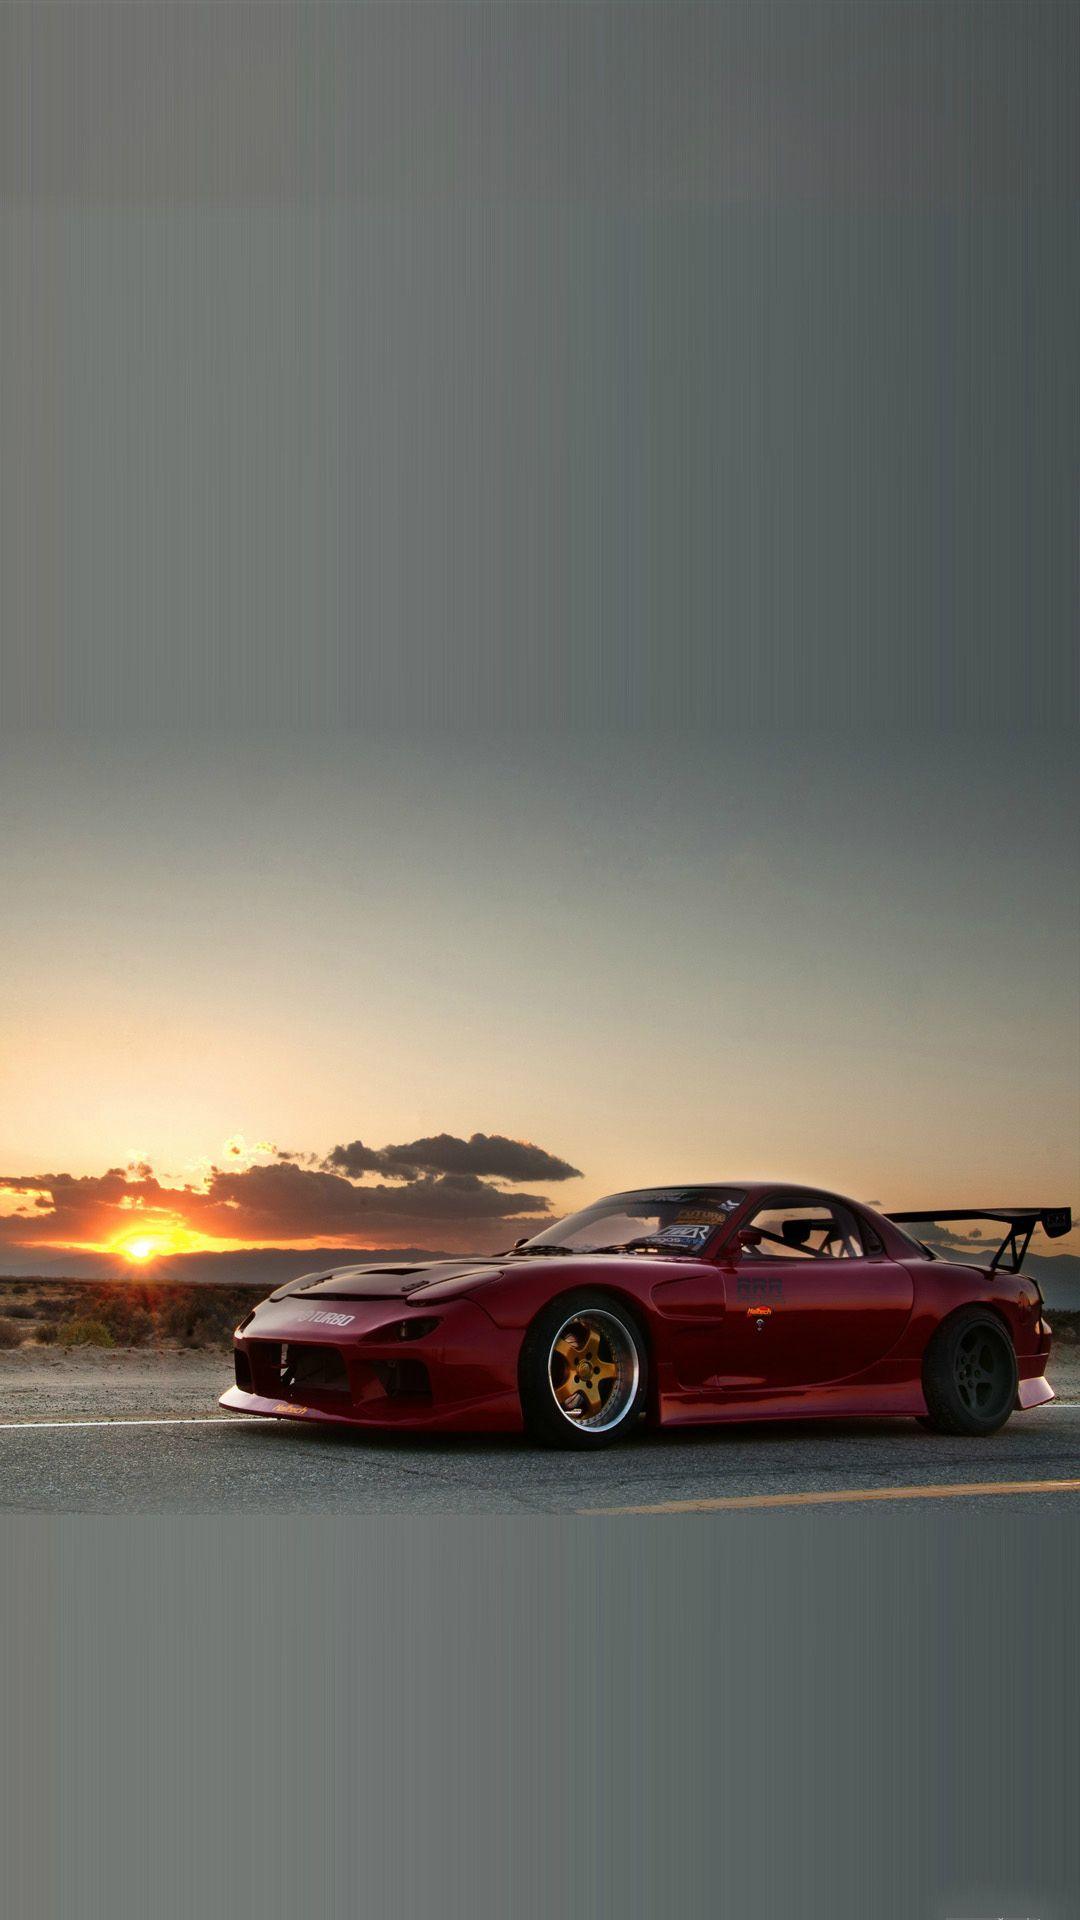 Mazda RX7 Sunset #iPhone #wallpaper. iPhone 8 wallpaper in 2018